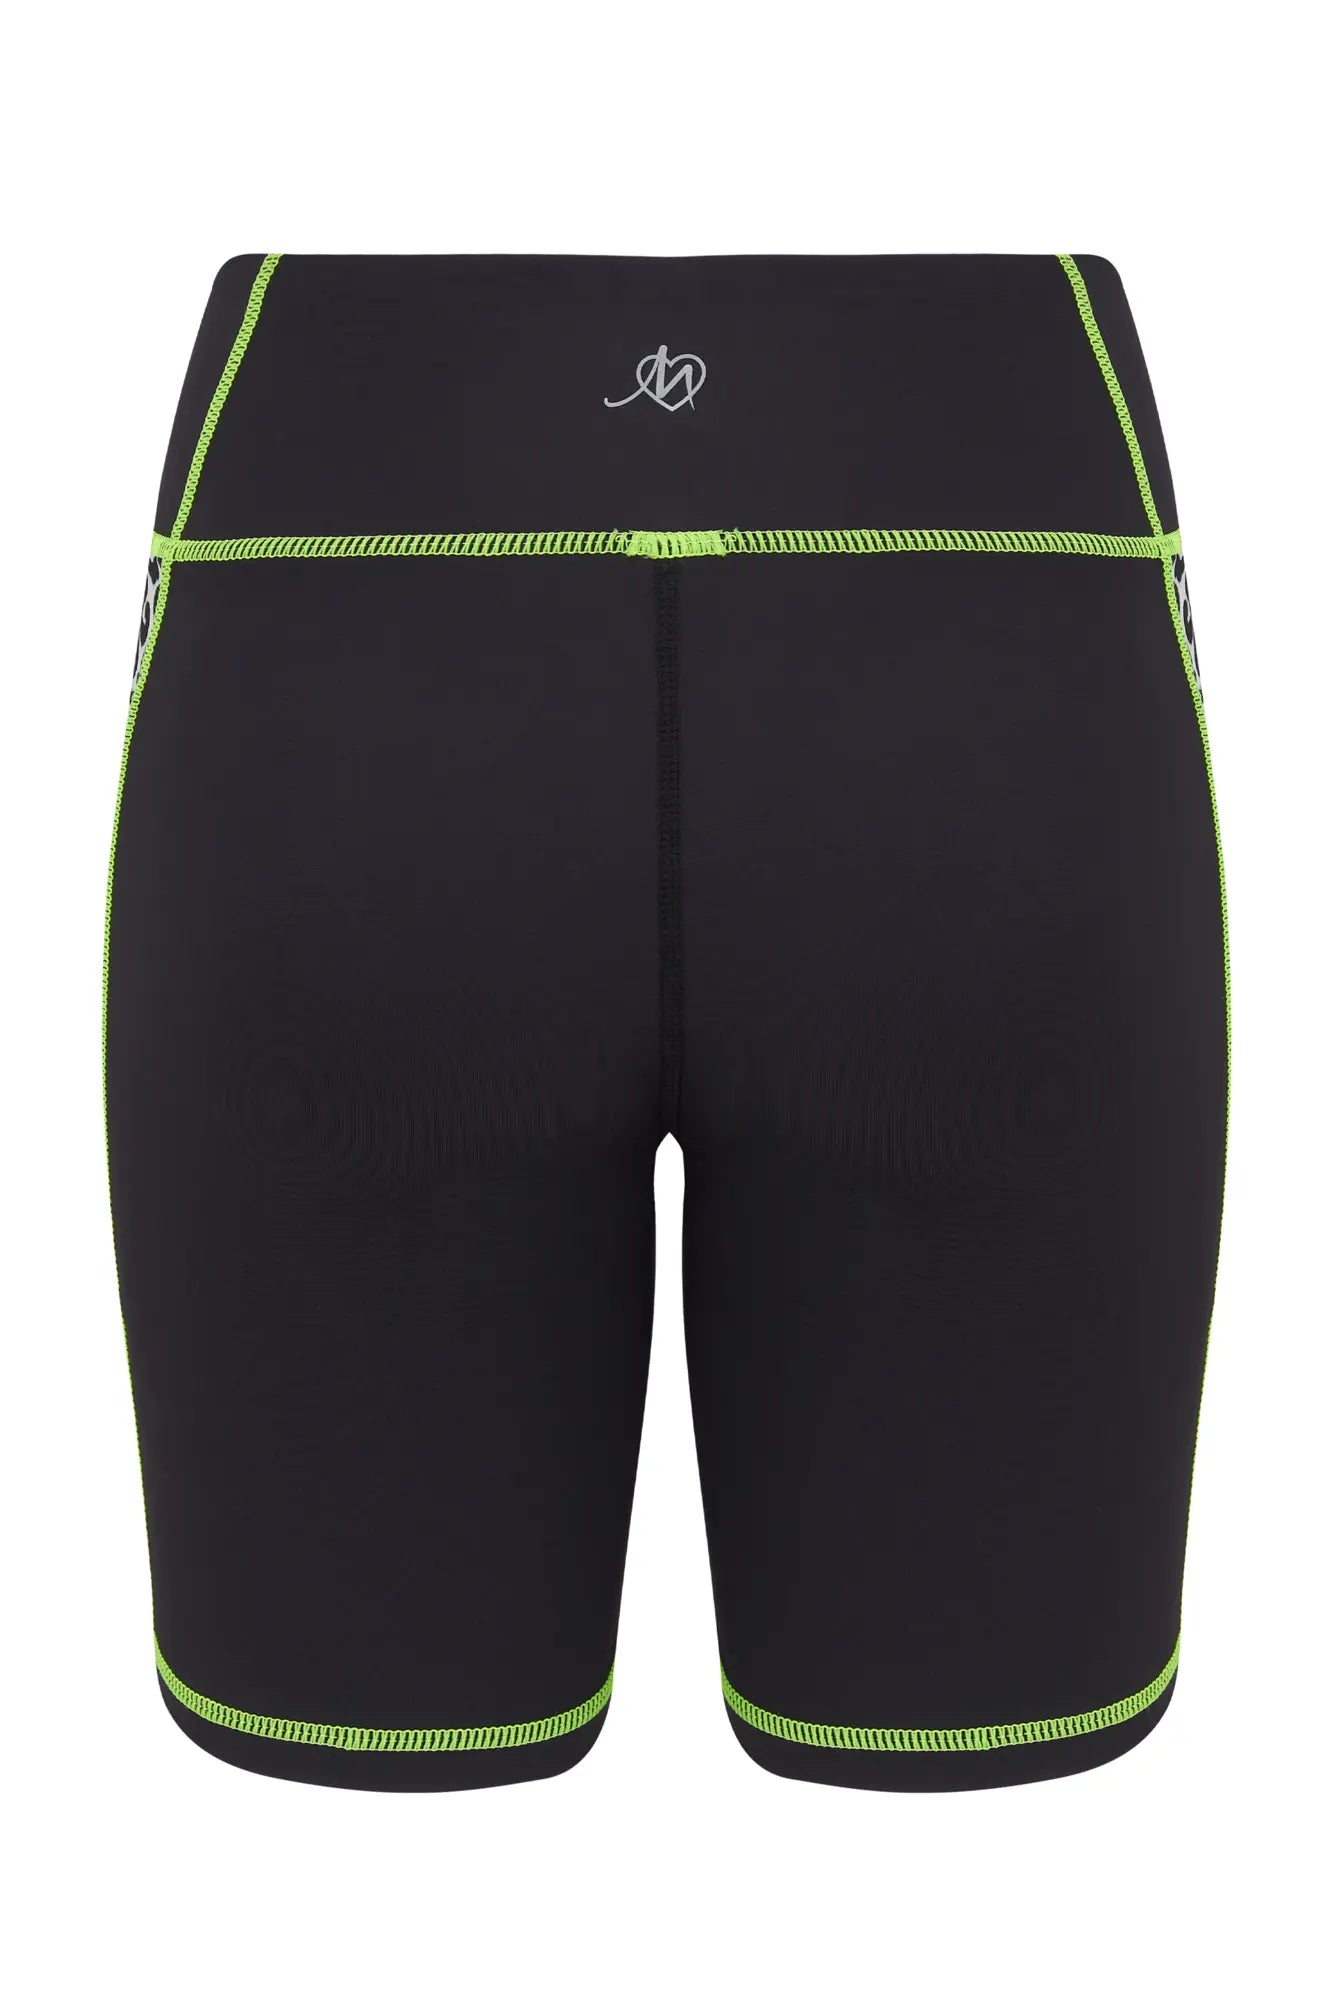 Energy Side Pocket Cycling Shorts In Leopard & Lime - Pour Moi